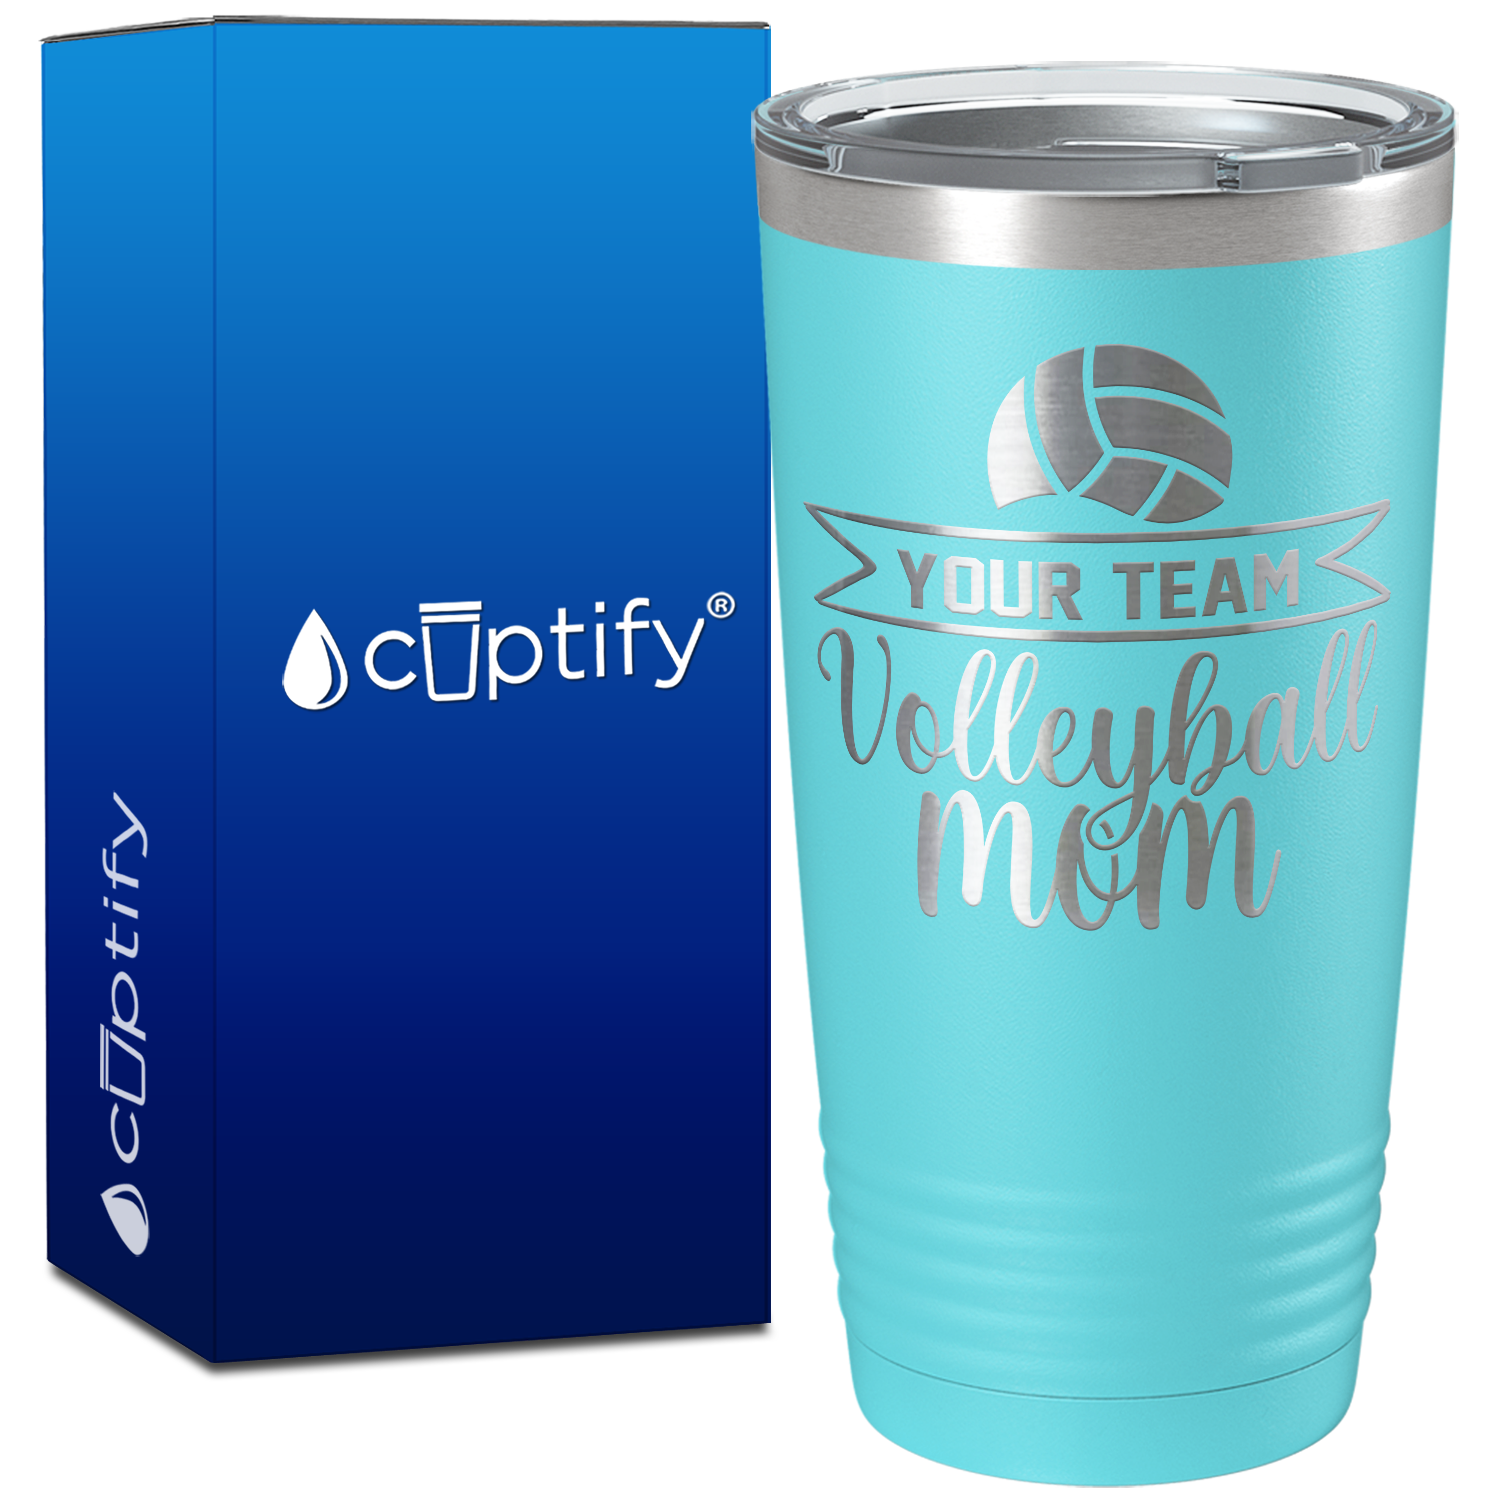 Personalized Team Name Volleyball Mom on 20oz Volleyball Tumbler